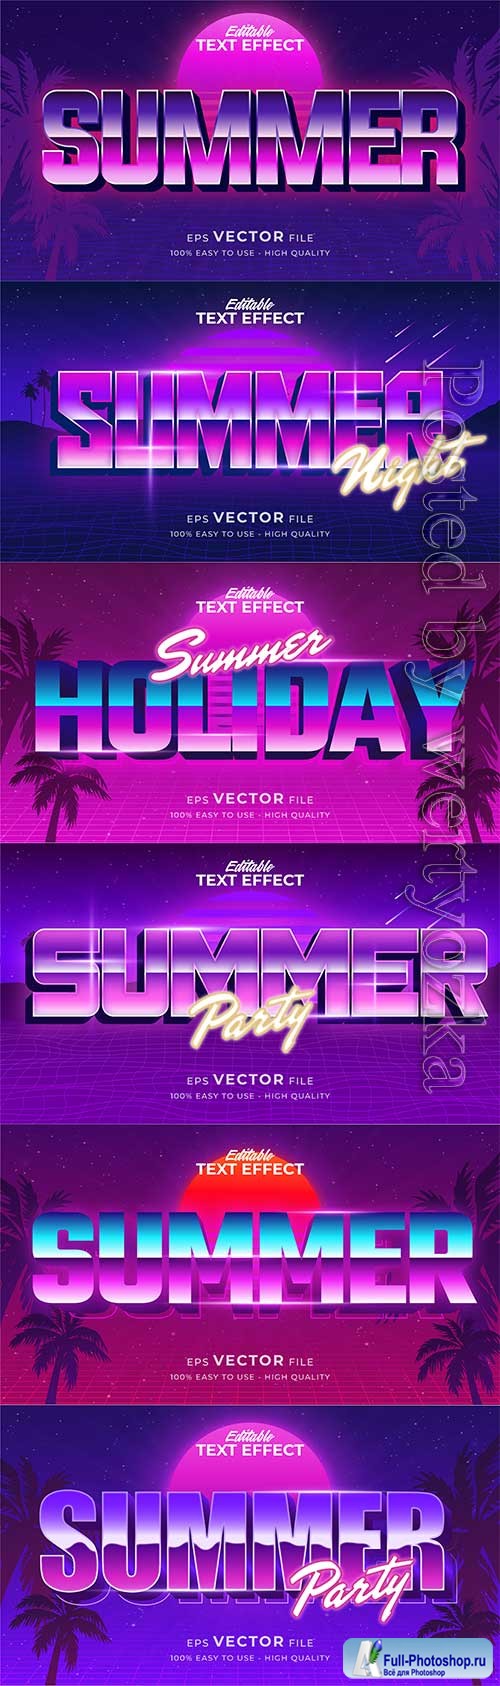 Retro summer holiday text in grunge style theme in vector vol 12